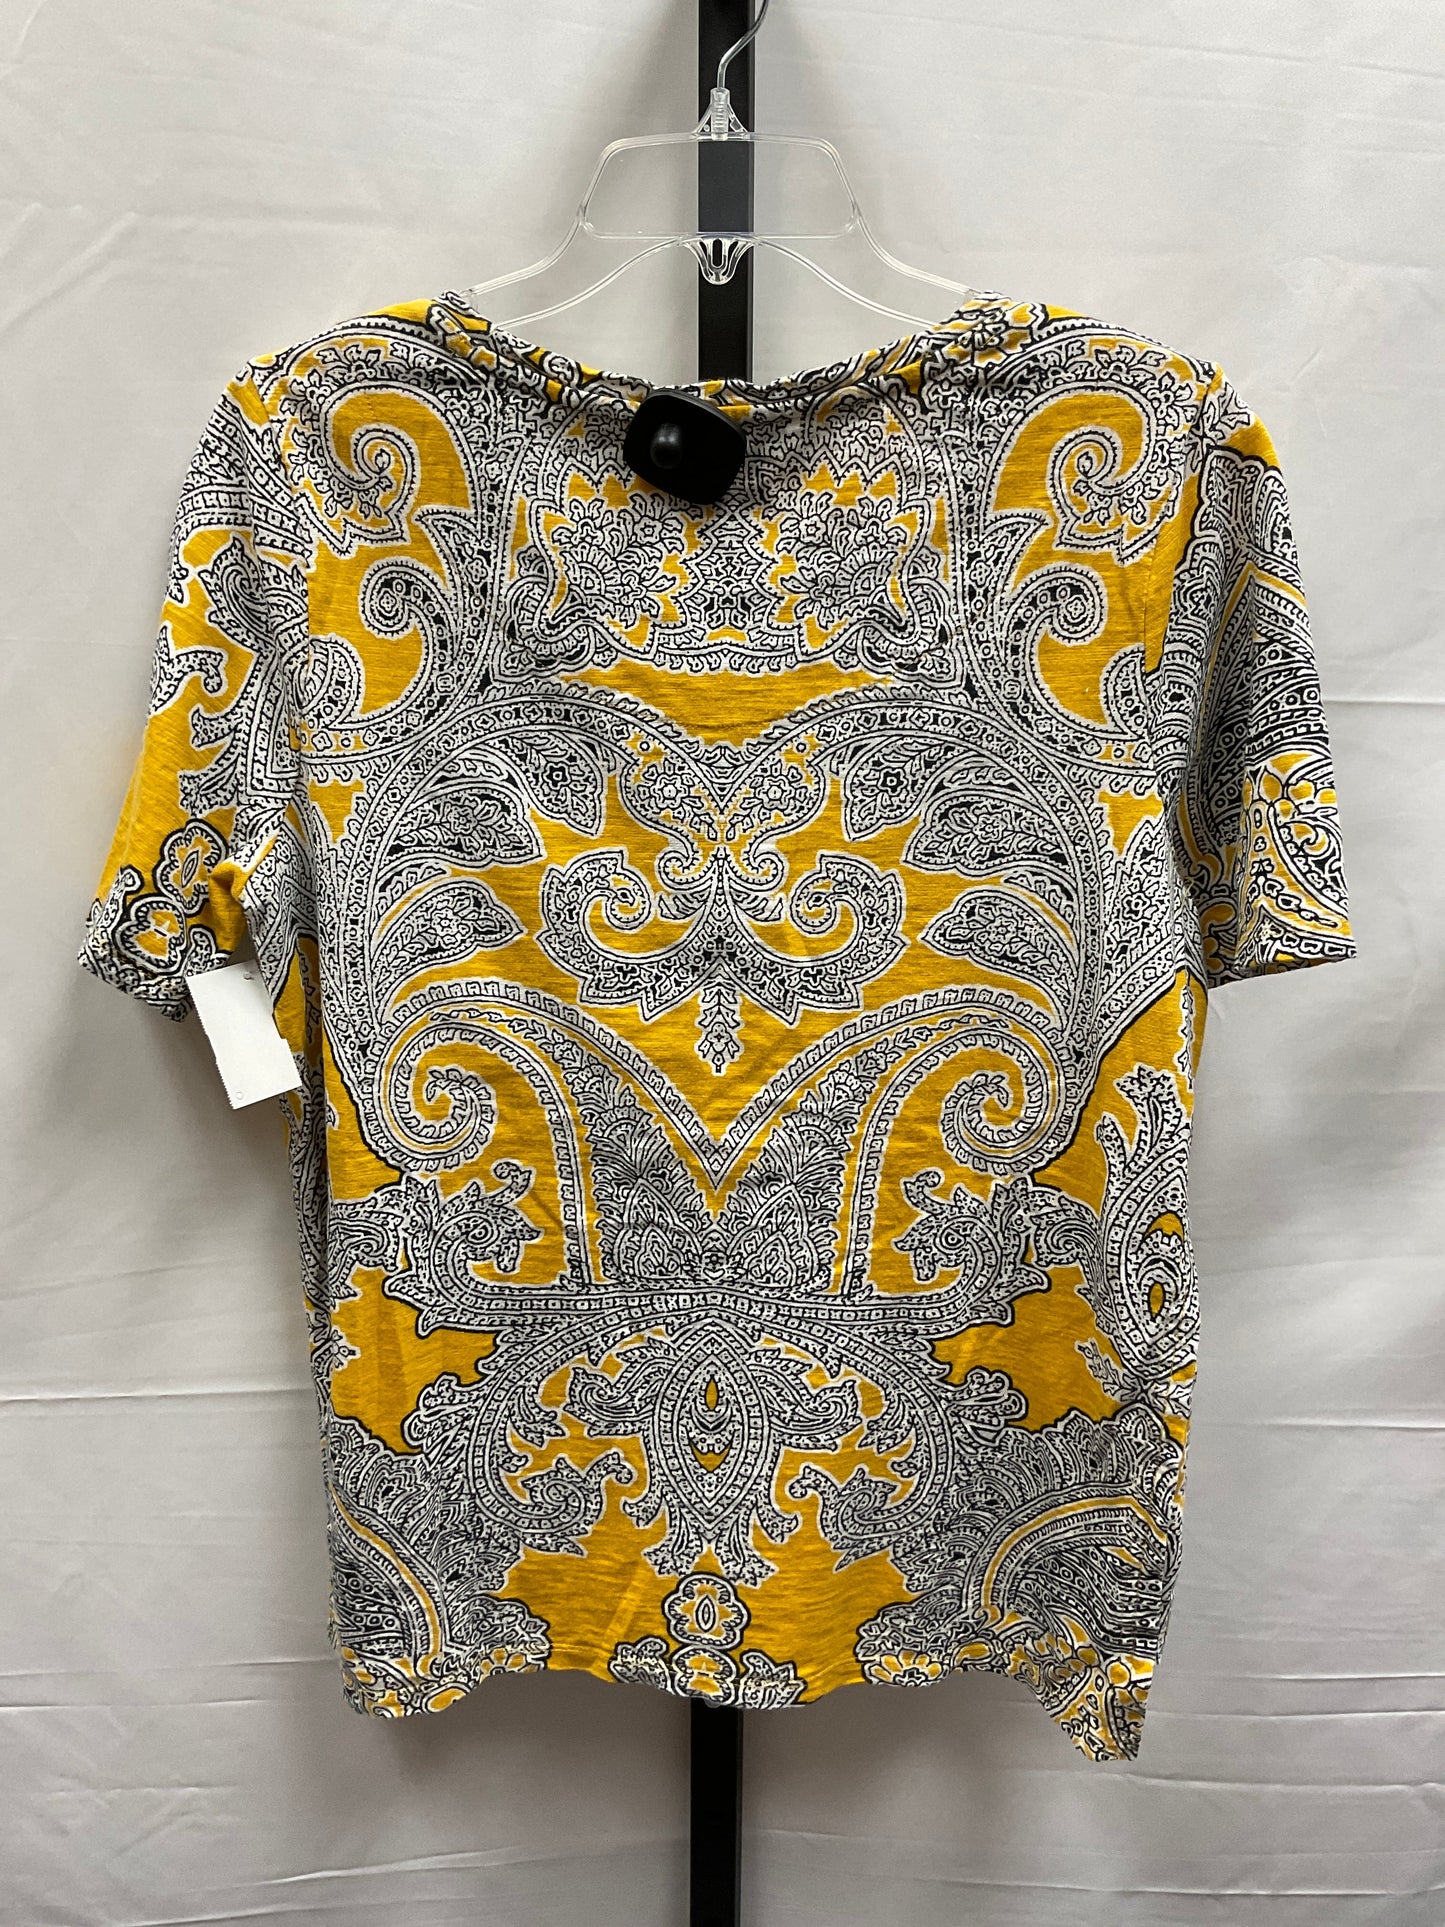 Yellow Top Short Sleeve Chicos, Size M